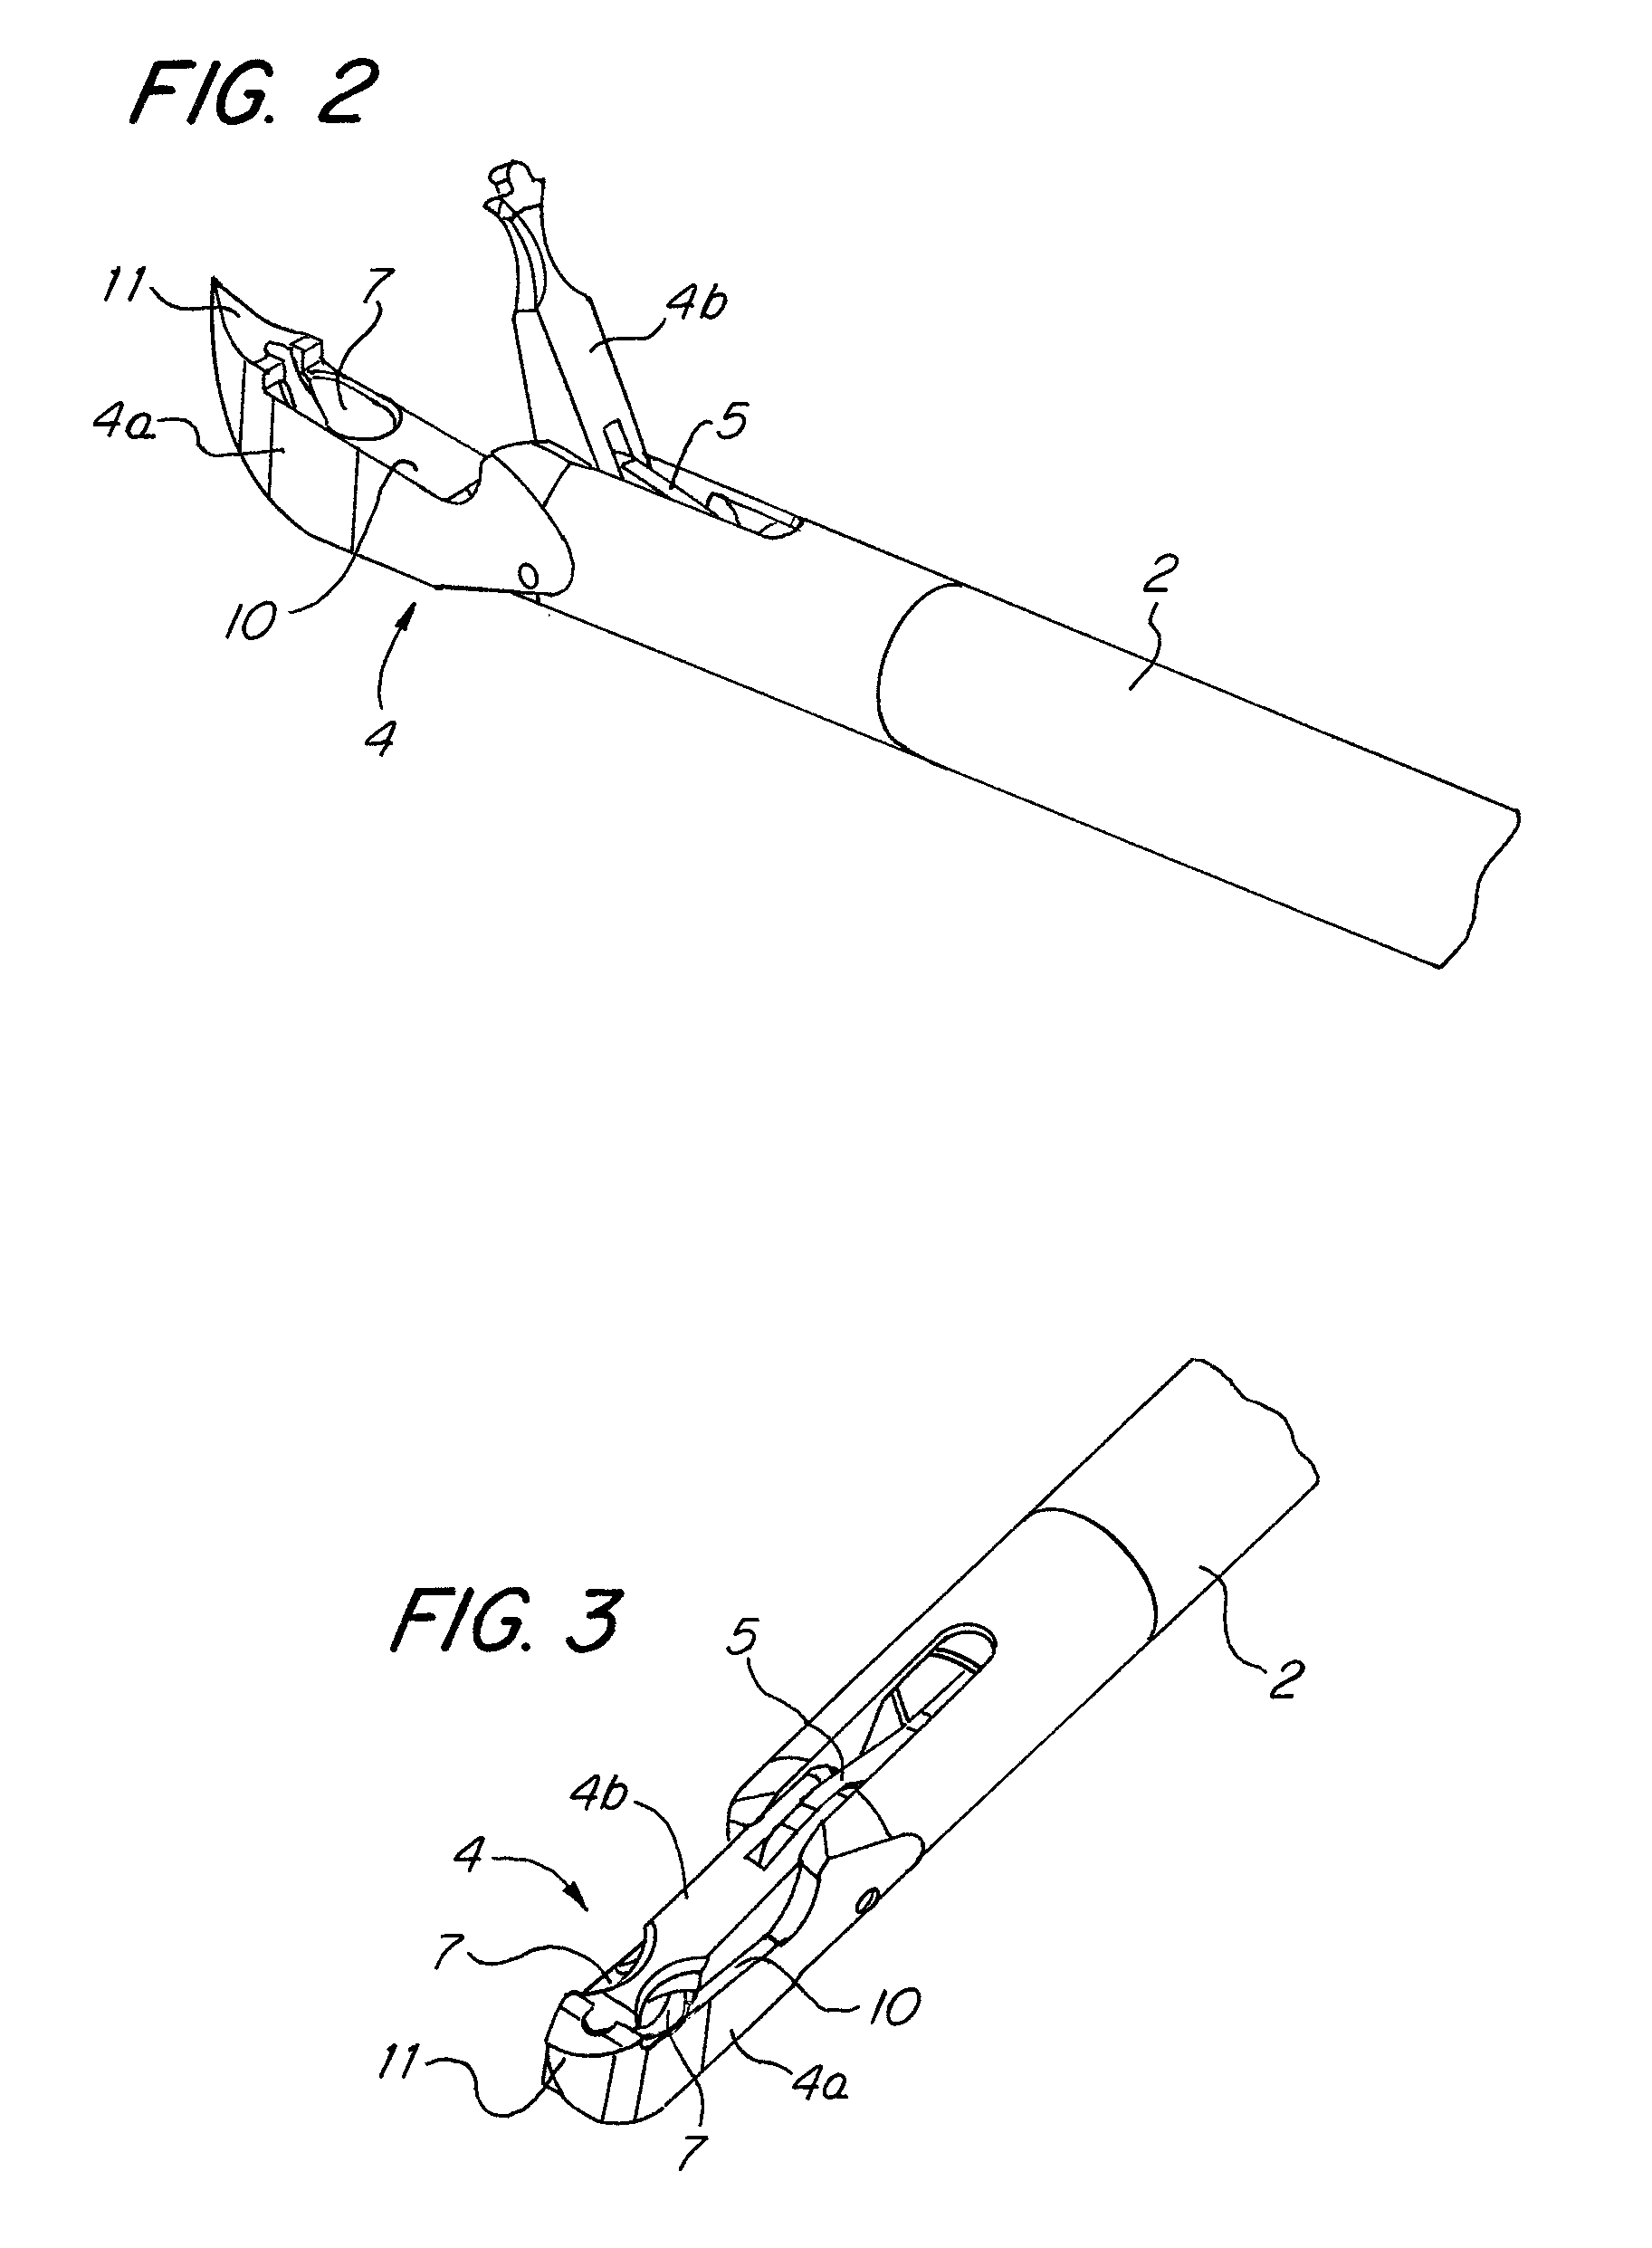 Medical instrument for grasping surgical suture material